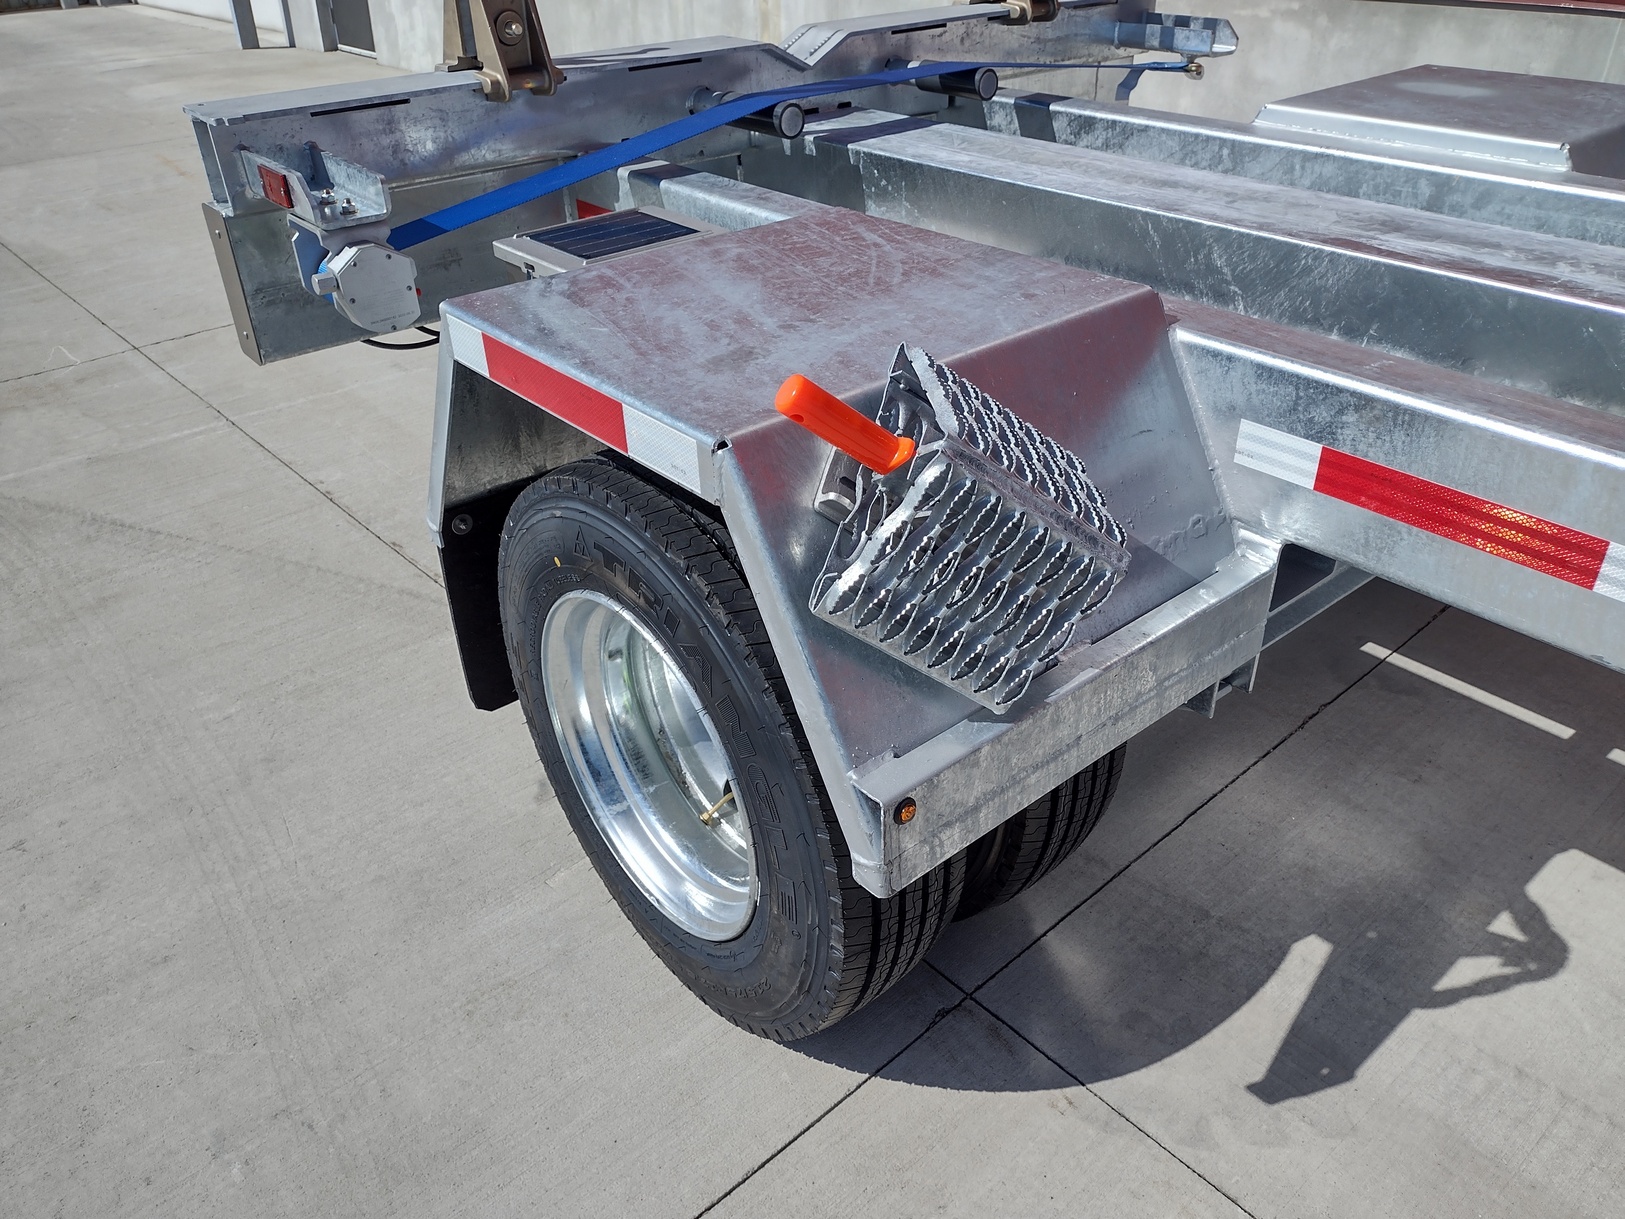 Almag wheel chock holder with Sauber Mfg. Co. All Weather Wheel Chock mounted to trailer fender. The trailer is a hot dipped galvanized Sauber Mfg. Co. Pole Trailer with dual wheels. The view is from the front of the wheels toward to the rear of the trailer. The the fender, one set of dual whees and the trailer rear are visible. Wheels are galvanized finished.